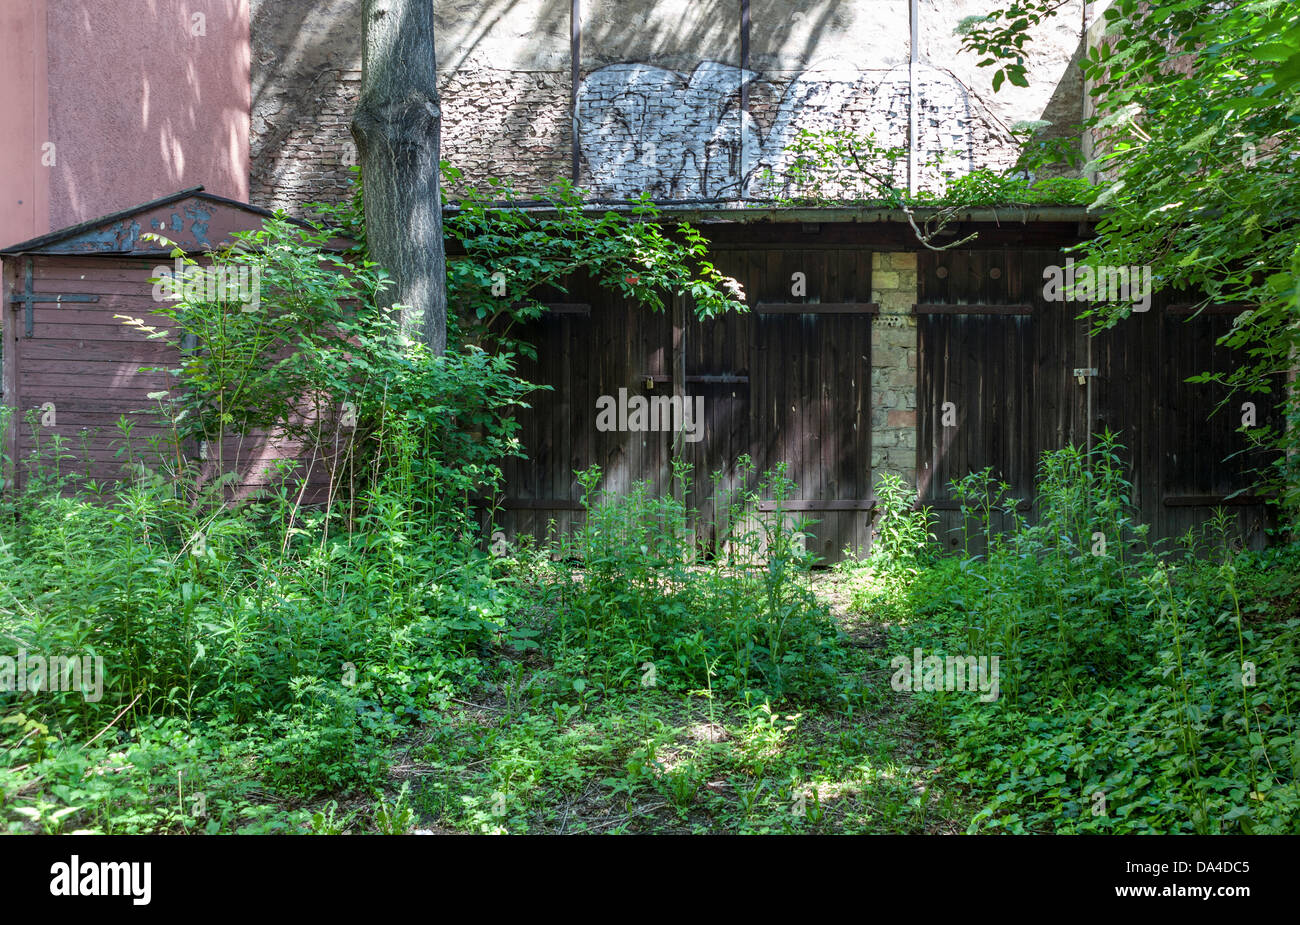 Urban decay - Dilapidated shed and garage doors in the inner courtyard of aBerlin building Stock Photo